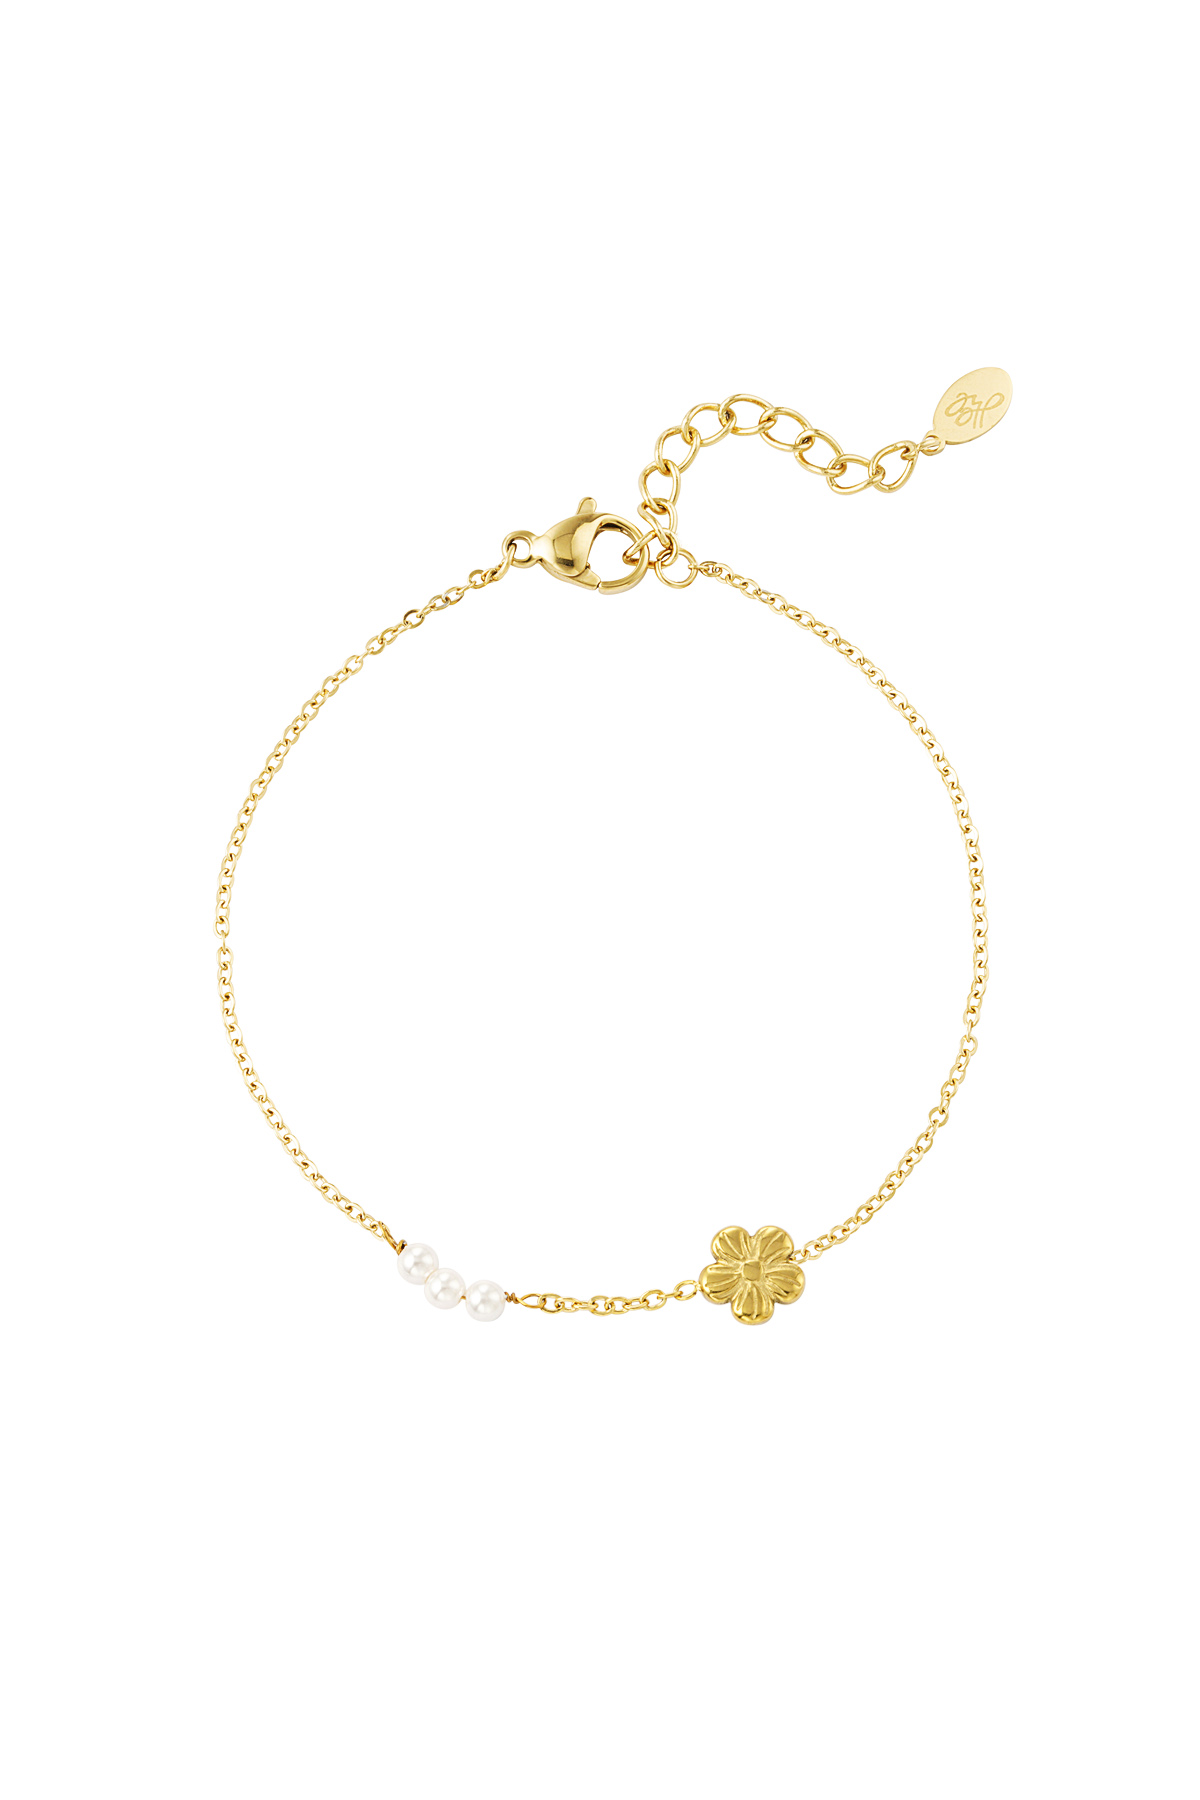 Bracelet flower with pearls - gold h5 